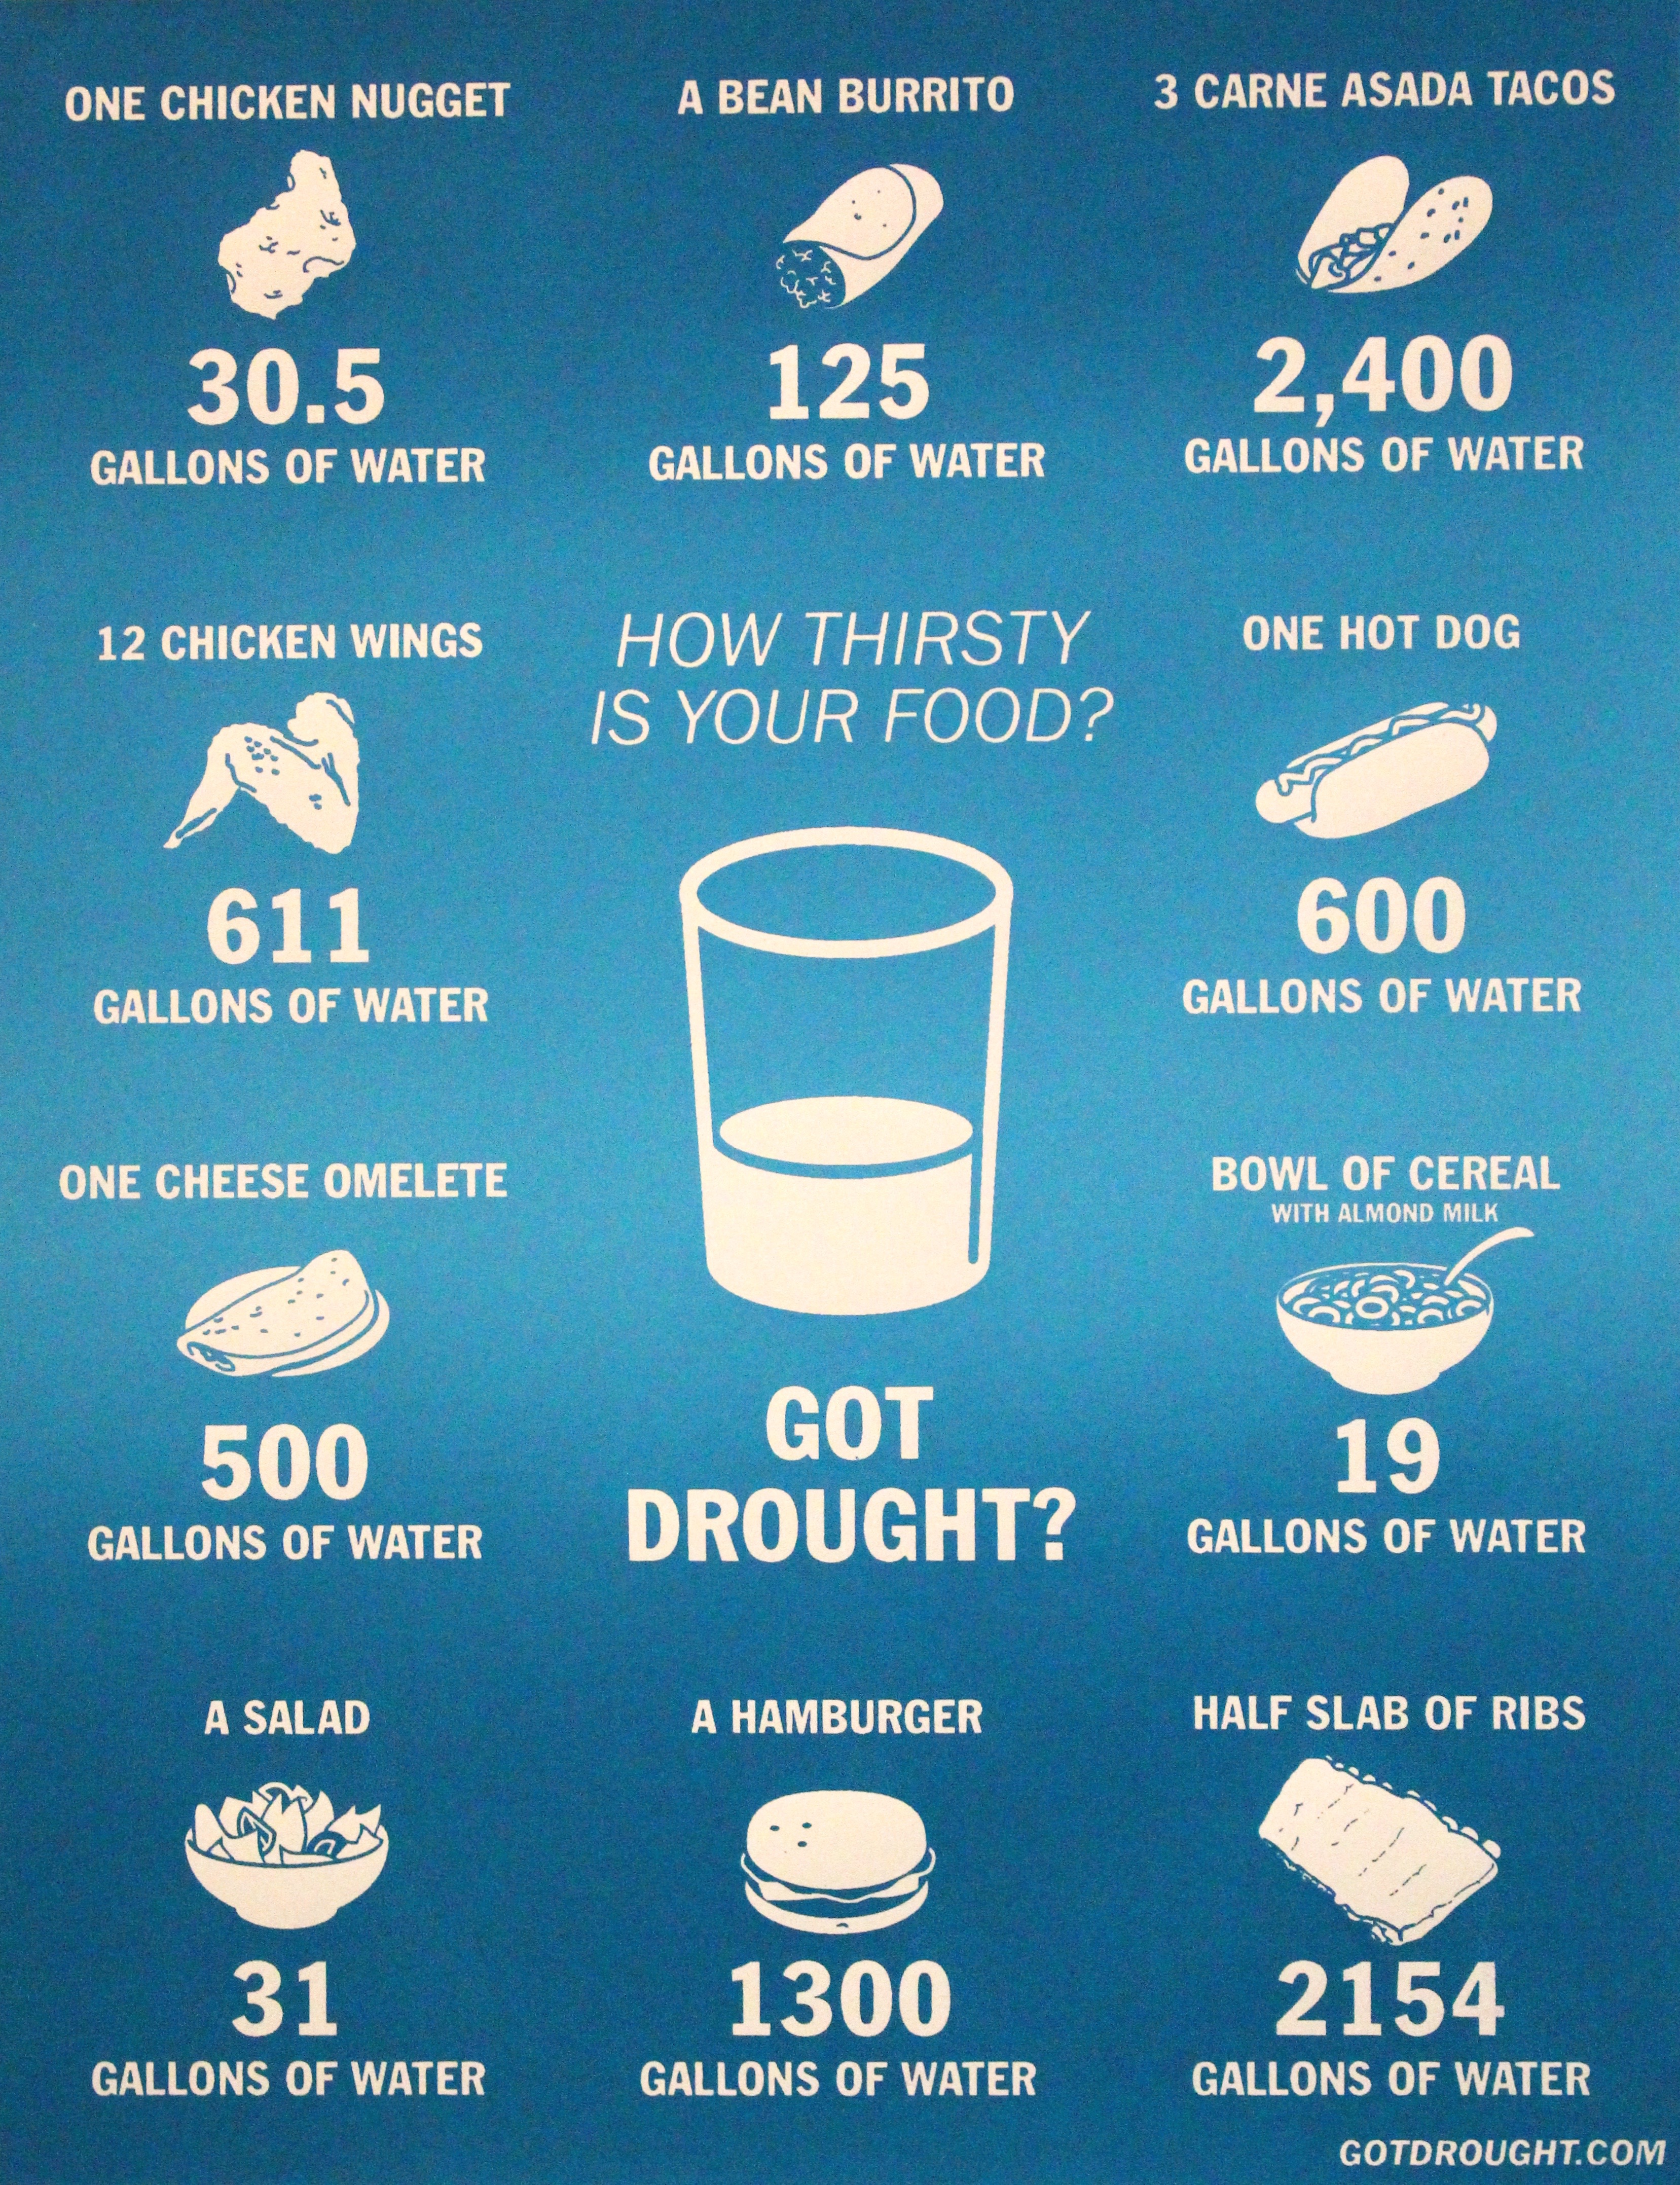 How Thirsty Is Your Food?